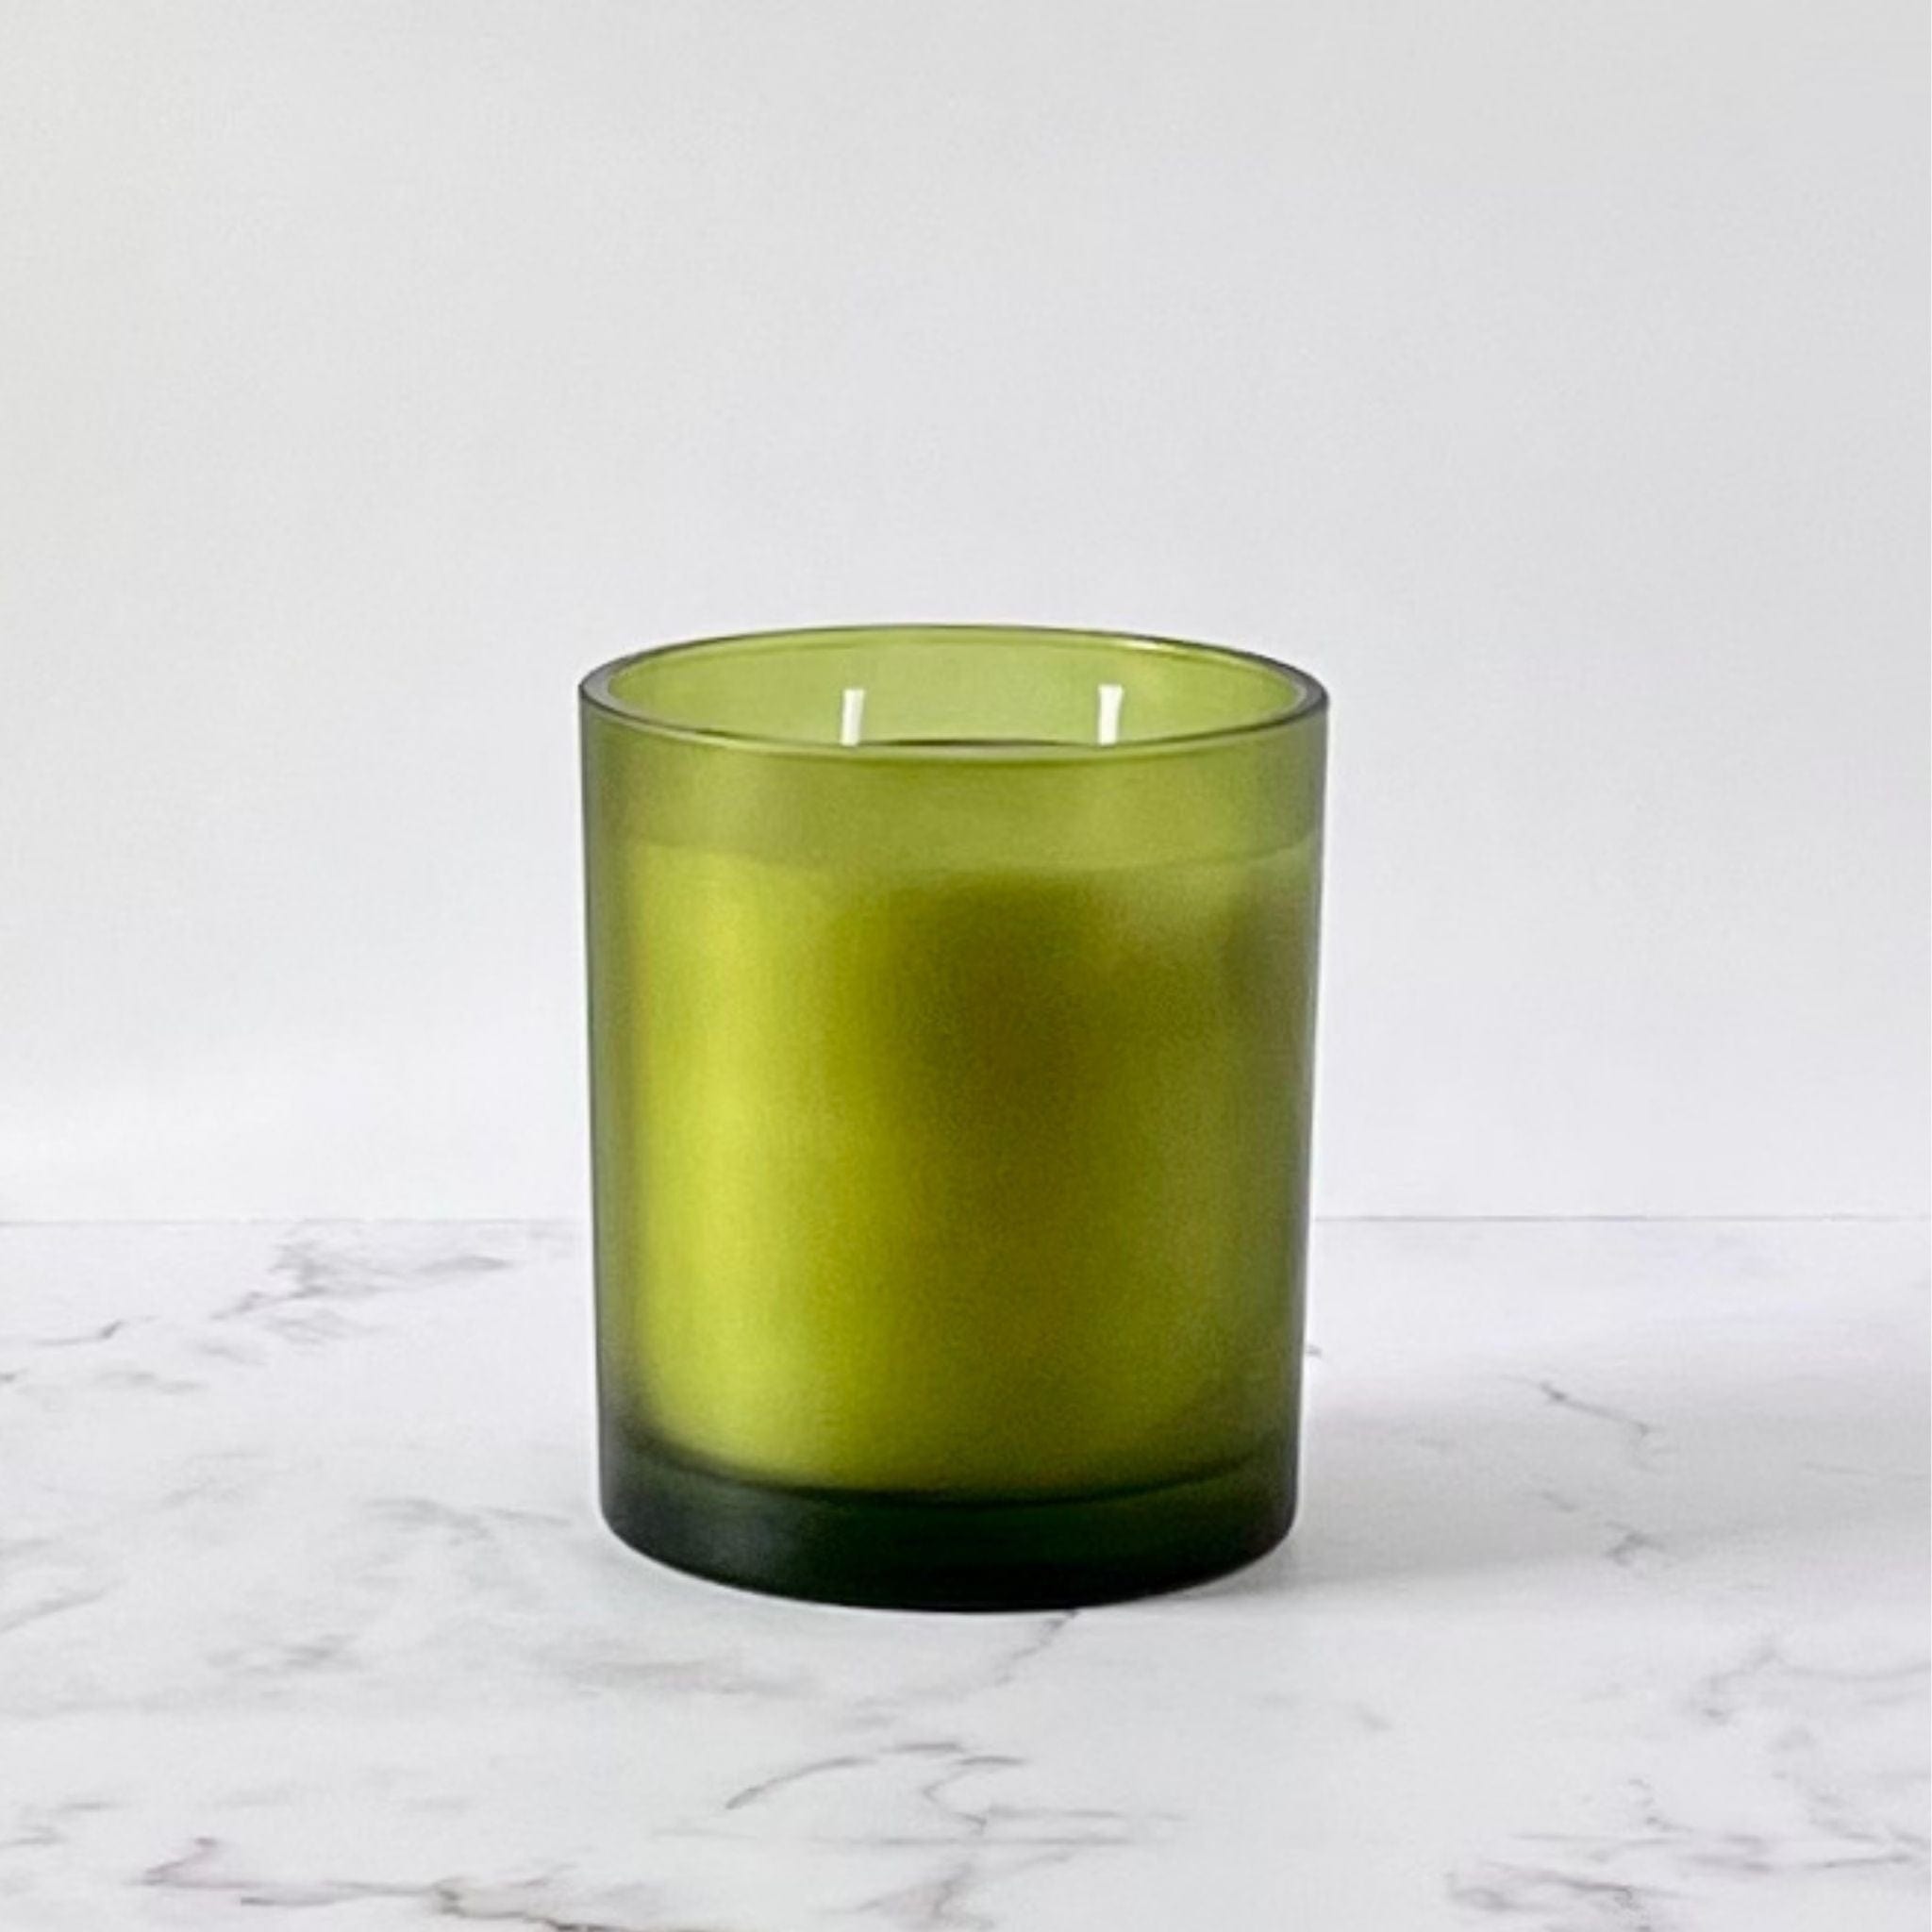 Private Label Candles by Velavida Candles 14 Oz Green Frosted Wholesale candles in bulk